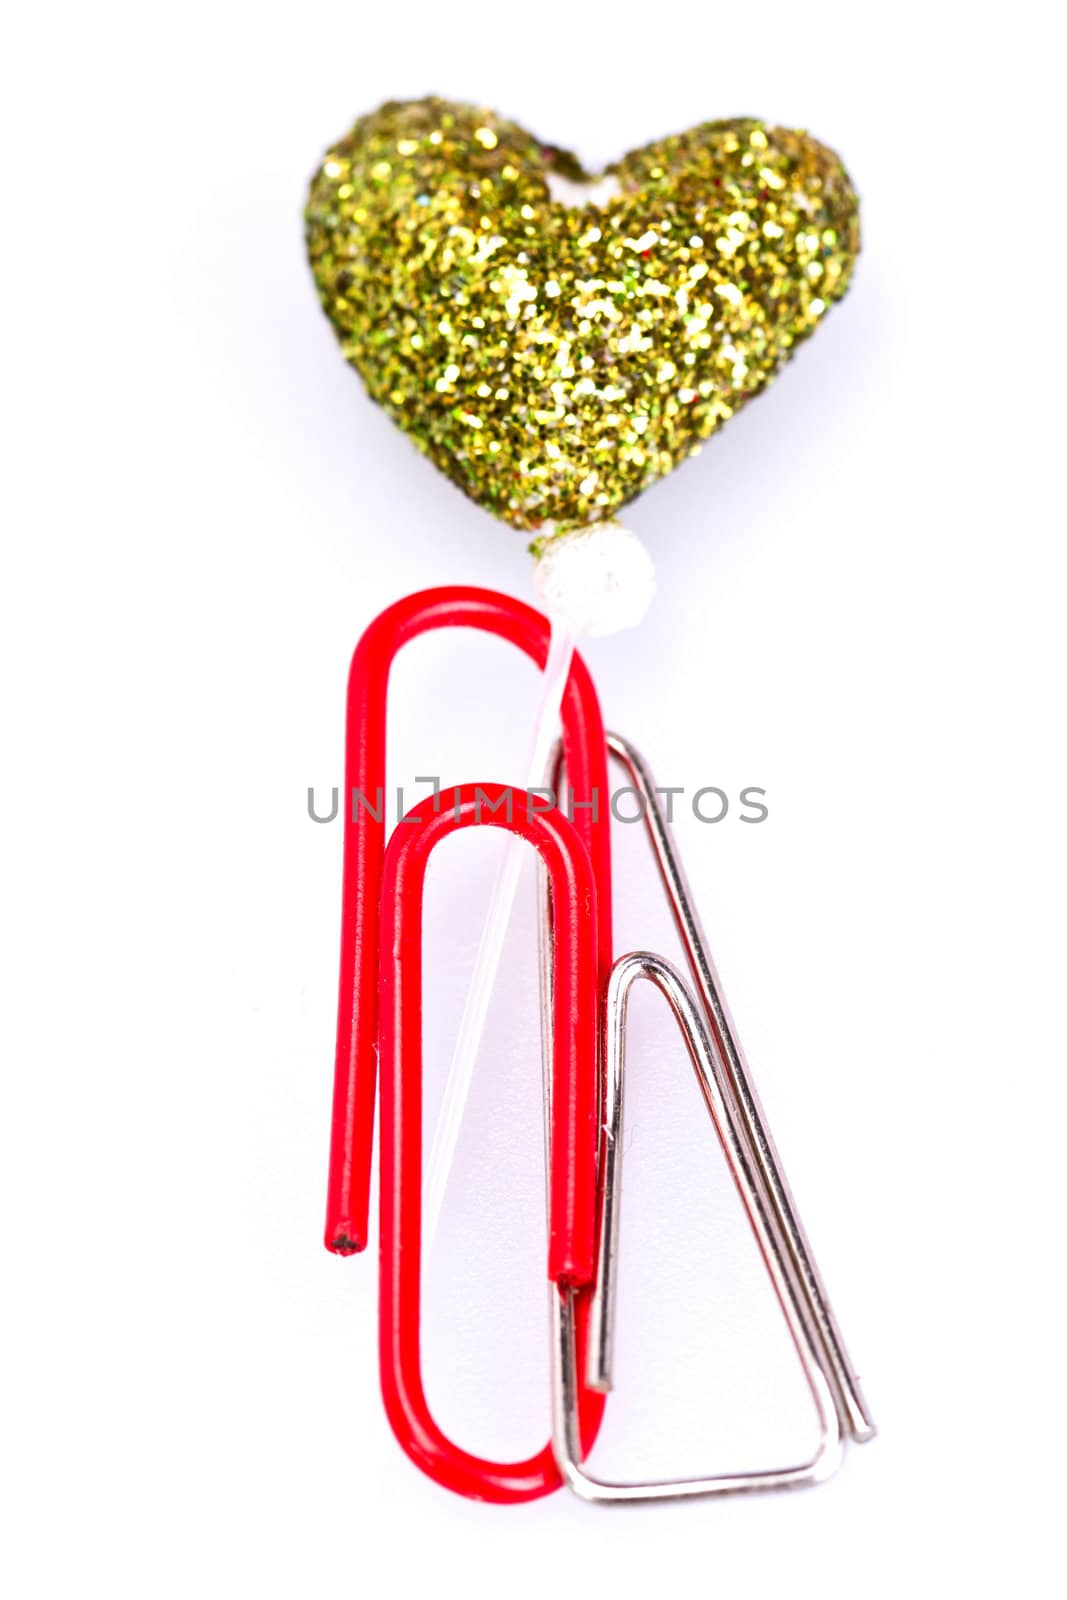 Metal and red plastic paerclip together with love symbol on white background